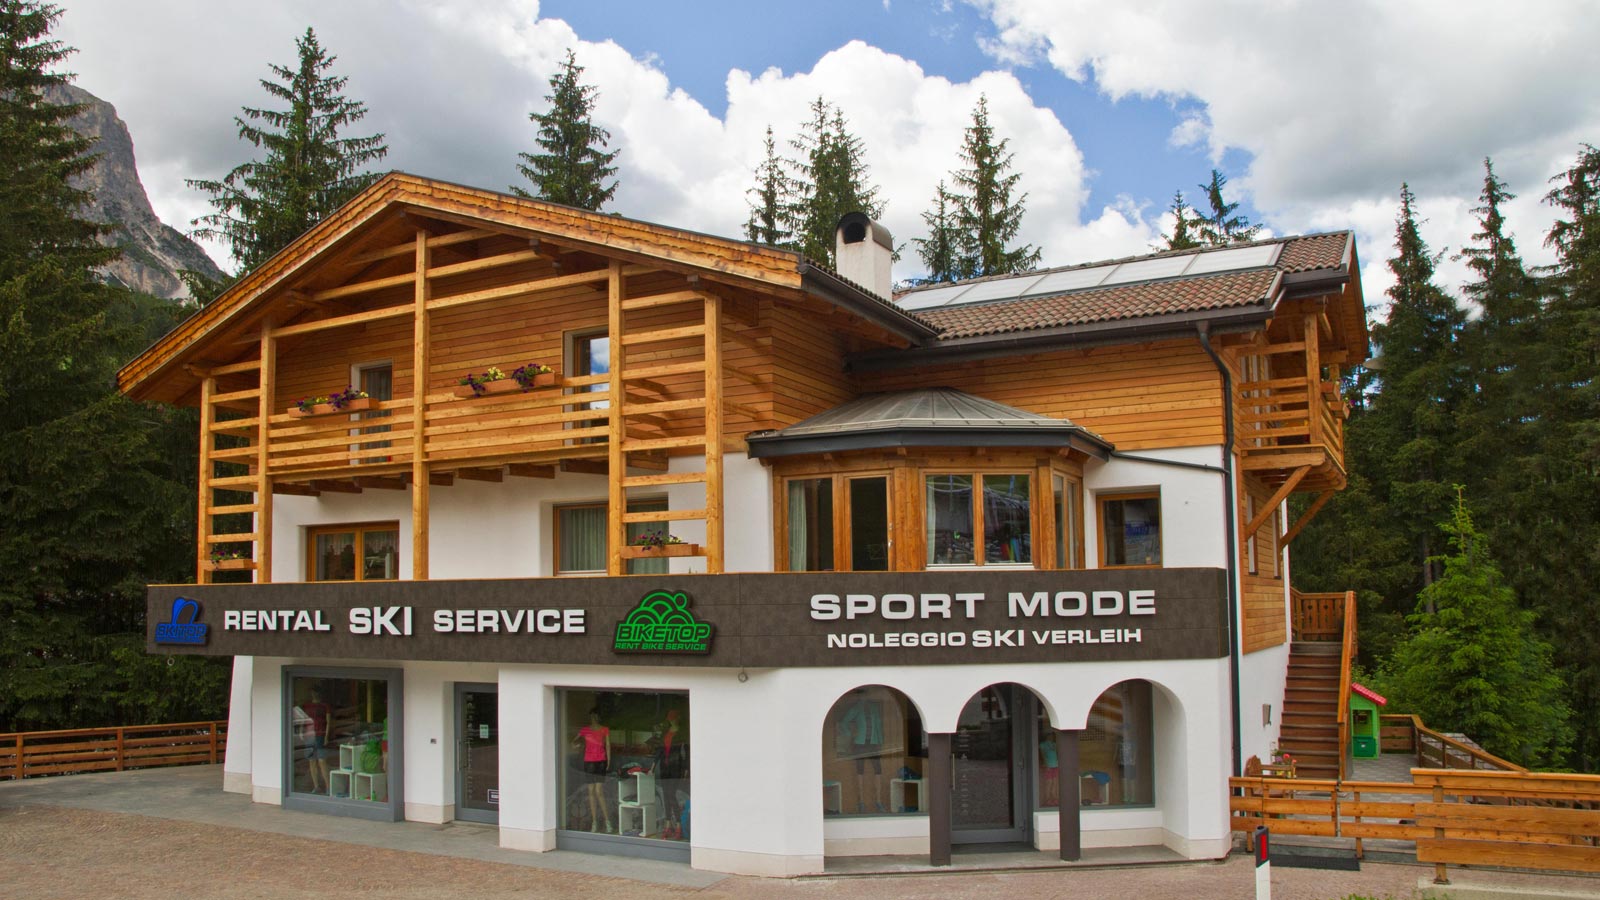 The front of the bike rental shop in Badia